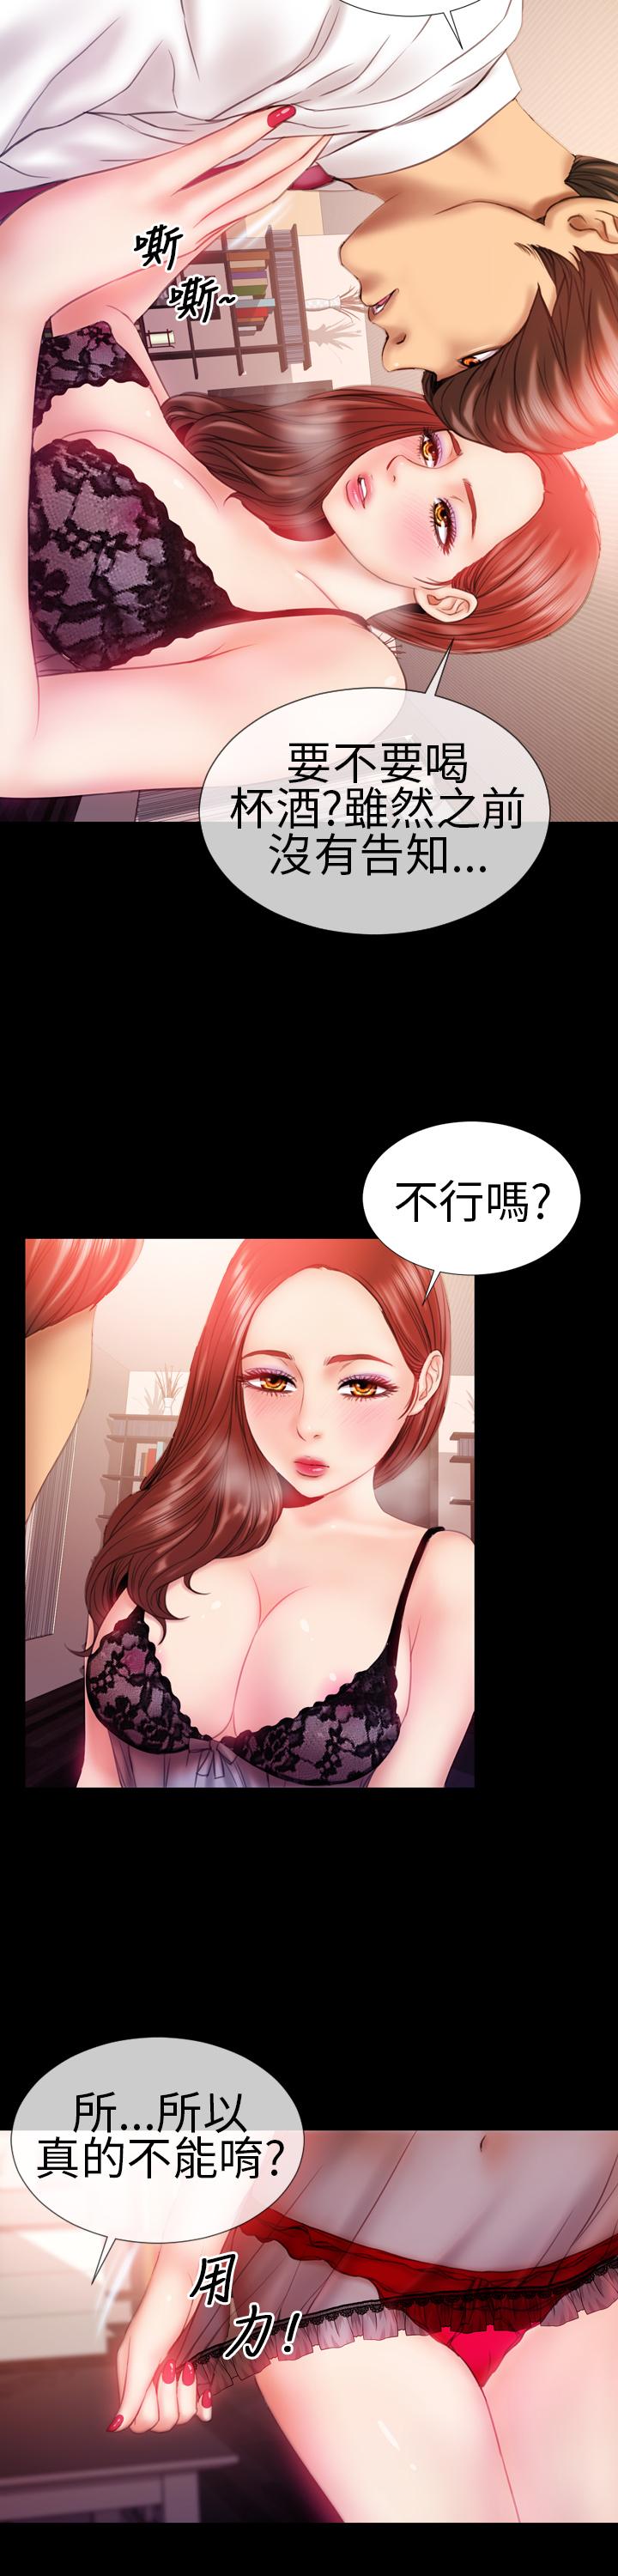 MY WIVES (淫蕩的妻子們) Ch.2 (Chinese) 6